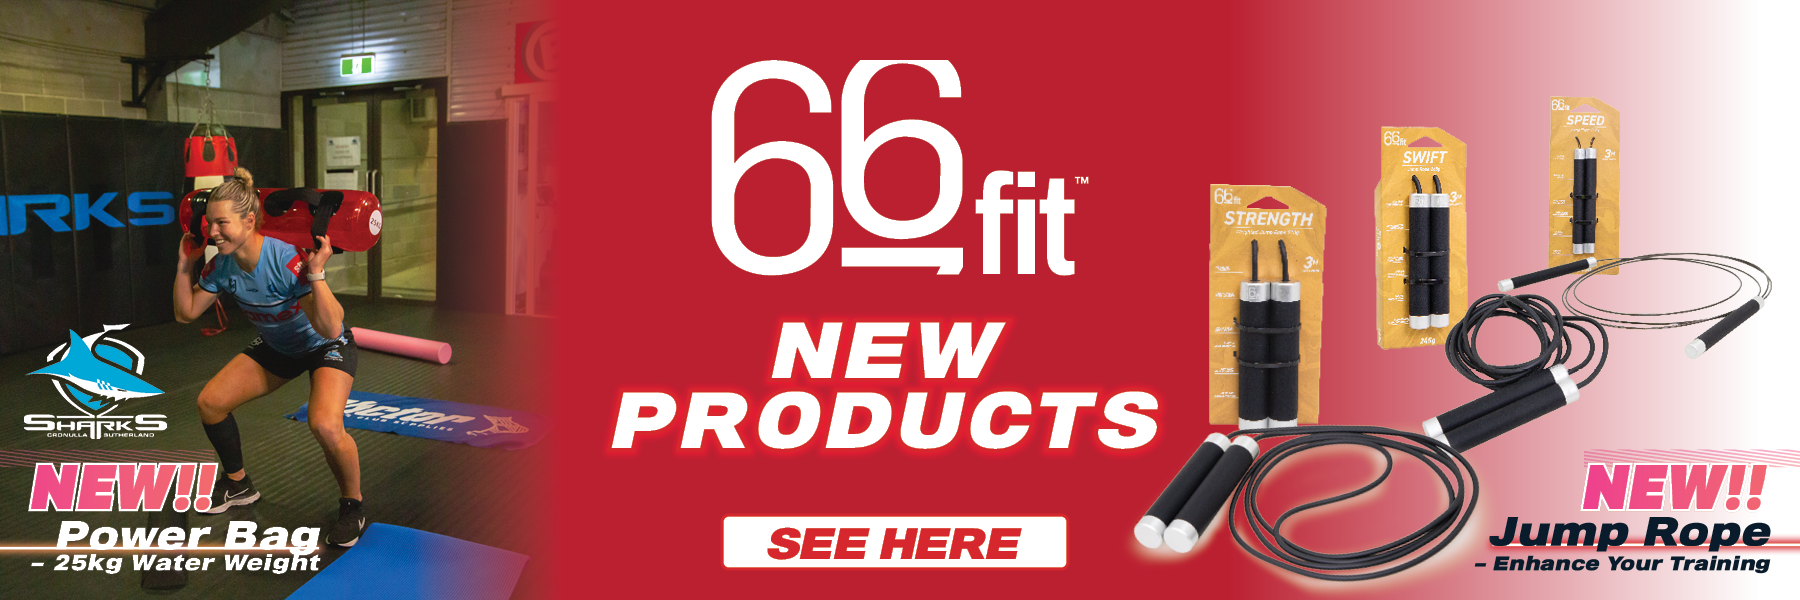 66fit New Products